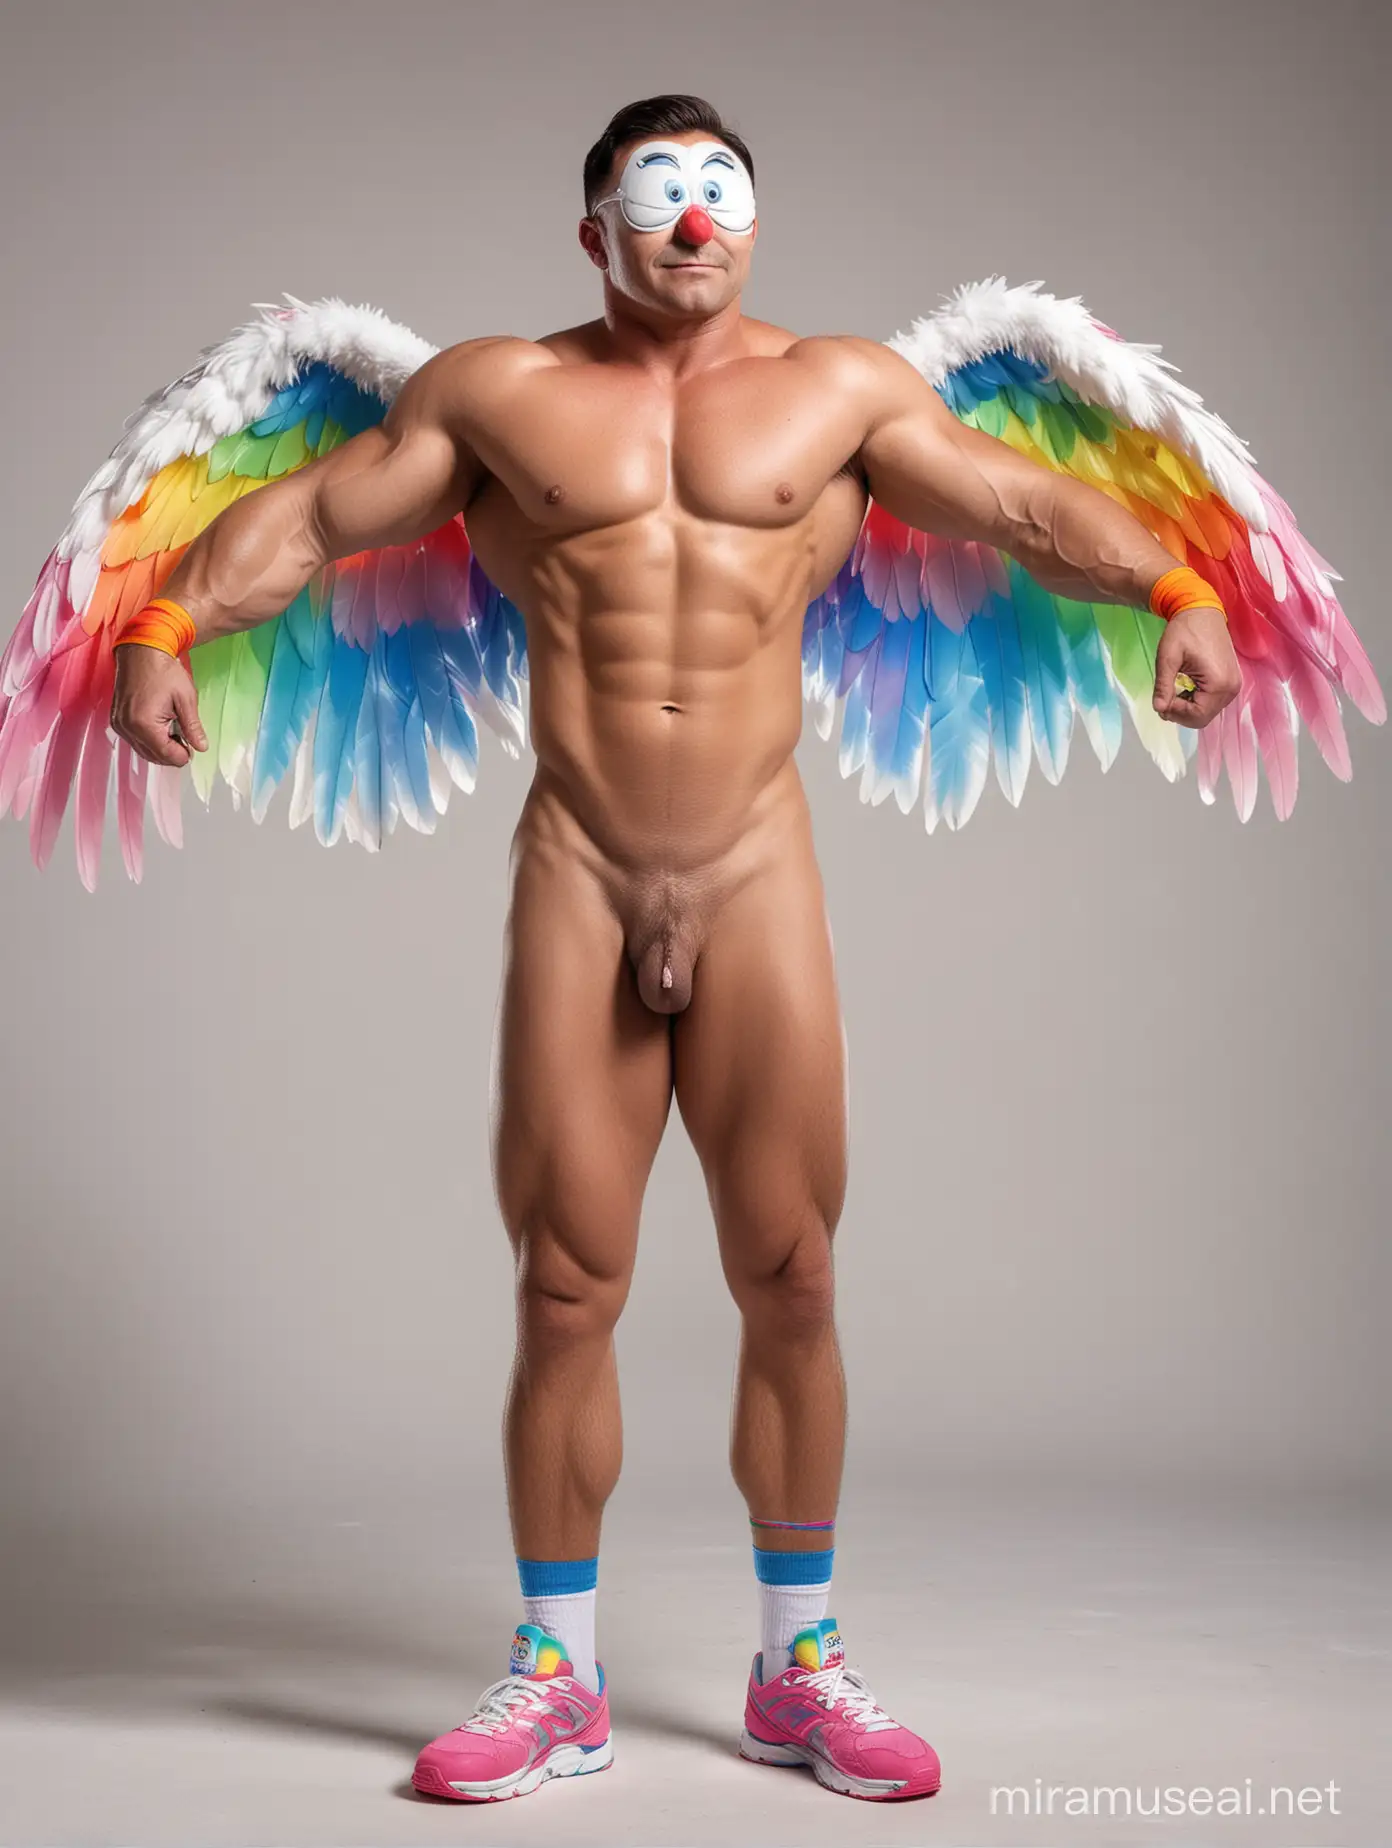 Full Body to feet Capture Topless 40s Ultra Beefy IFBB Bodybuilder Man Wearing Multi-Highlighter Bright Rainbow Coloured See Through Eagle Wings Shoulder Jacket short shorts and Flexing Big Strong Arm with Doraemon